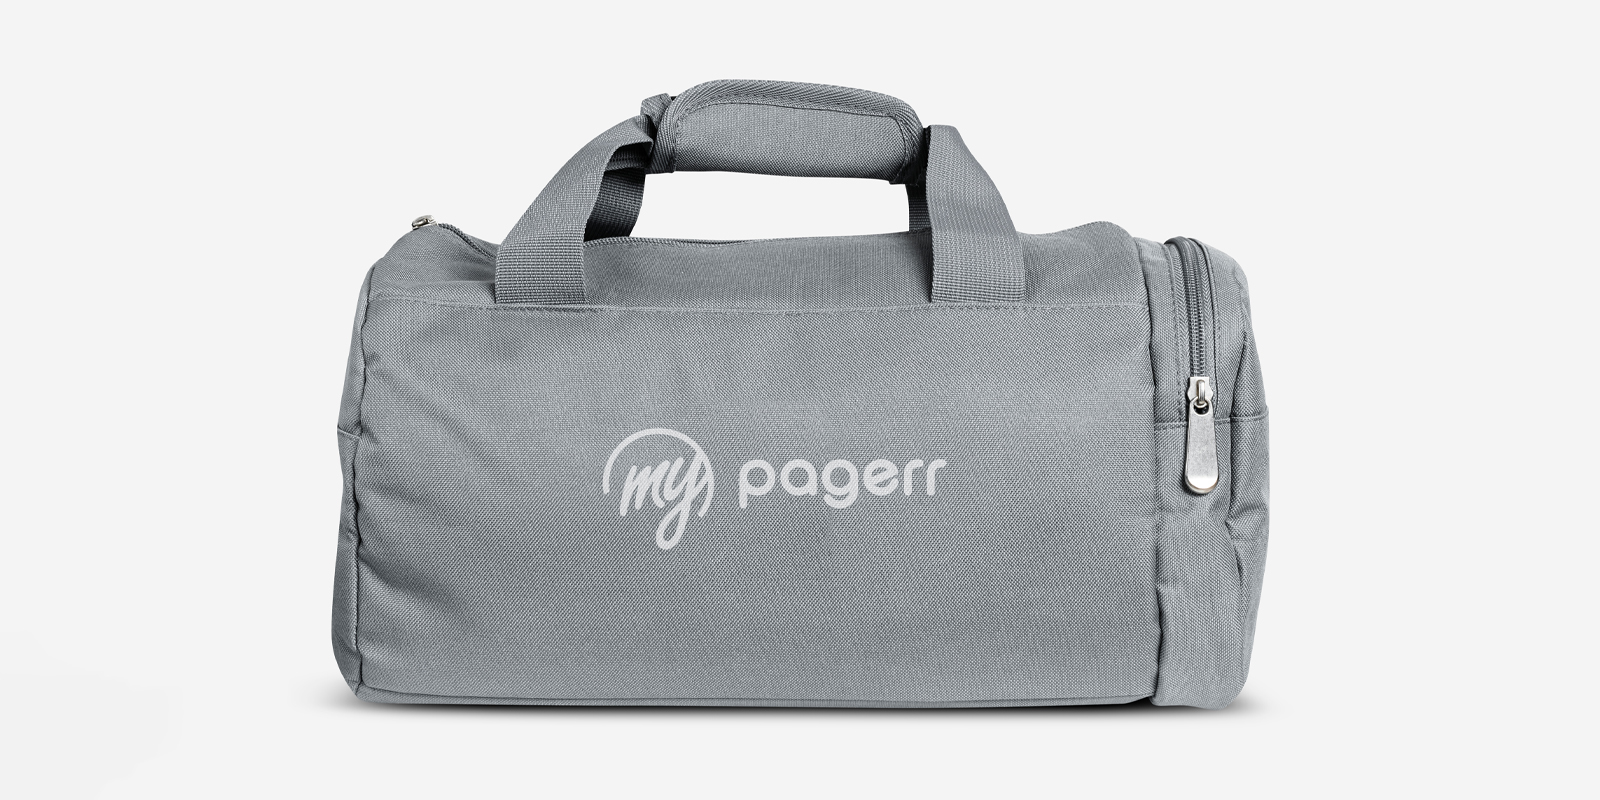 Duffel & gym bags in Cairns - Print with Pagerr